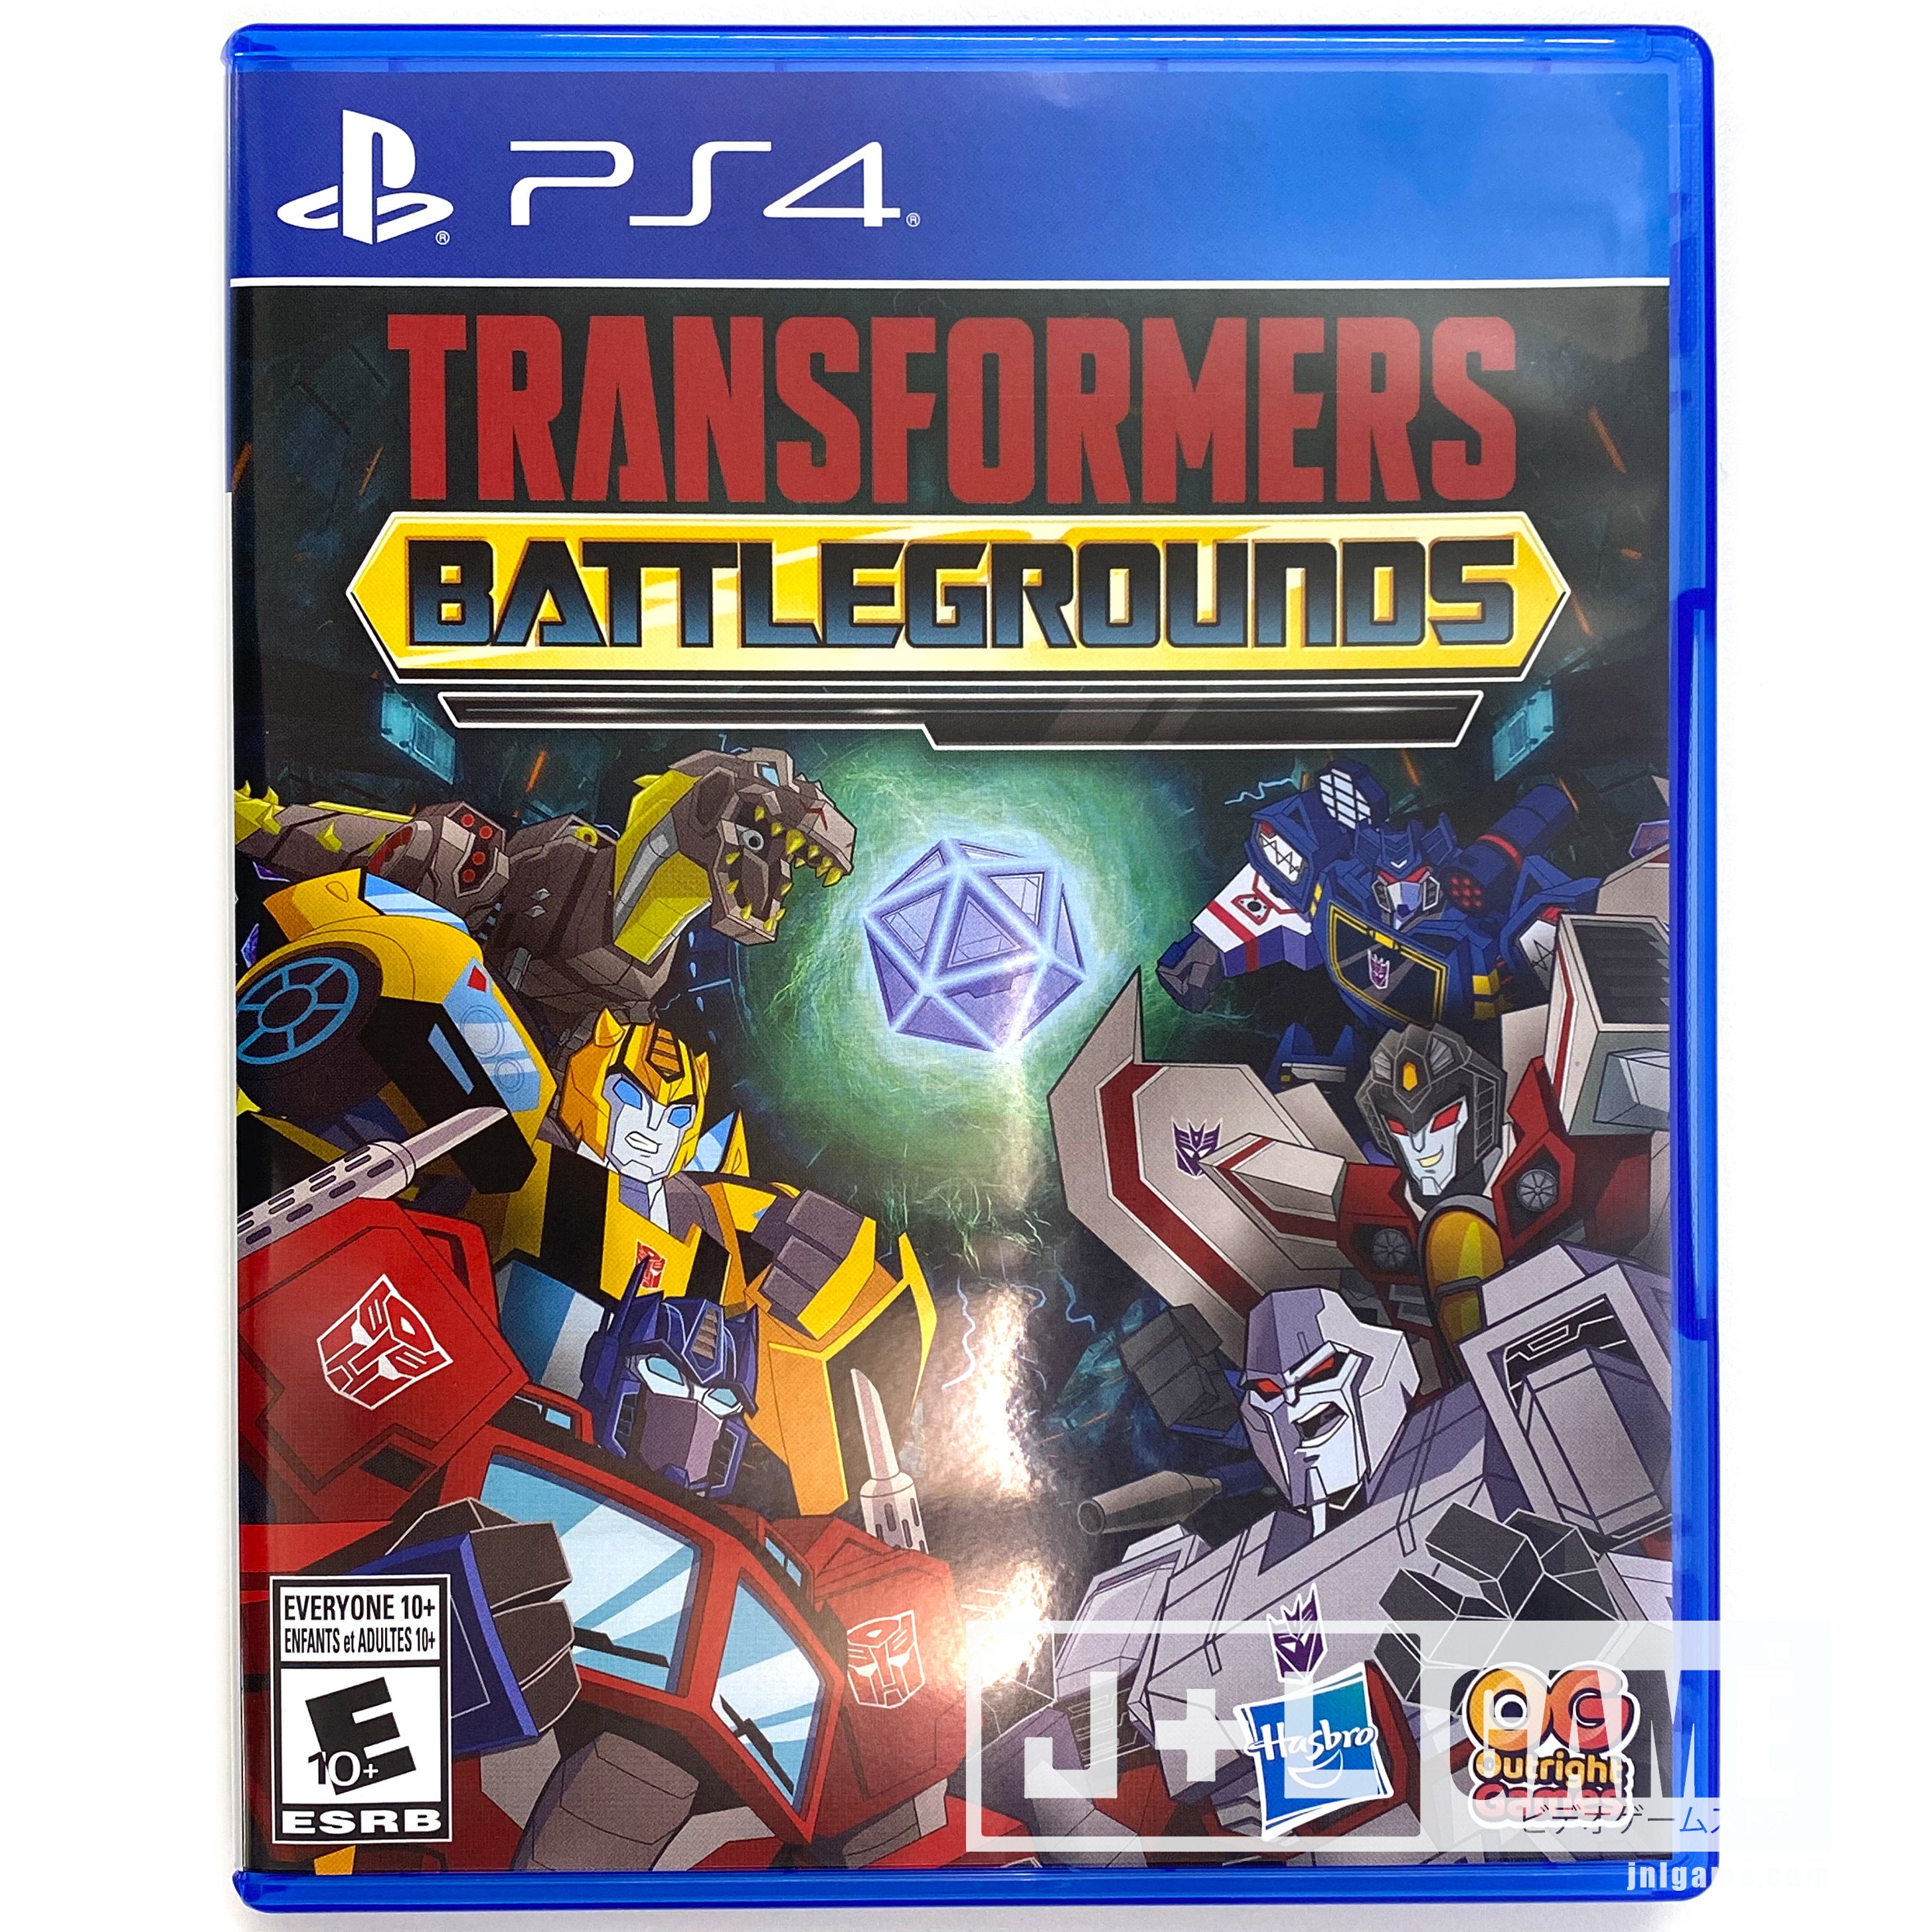 Transformers: Battlegrounds - (PS4) PlayStation 4 [UNBOXING] Video Games Outright Games   